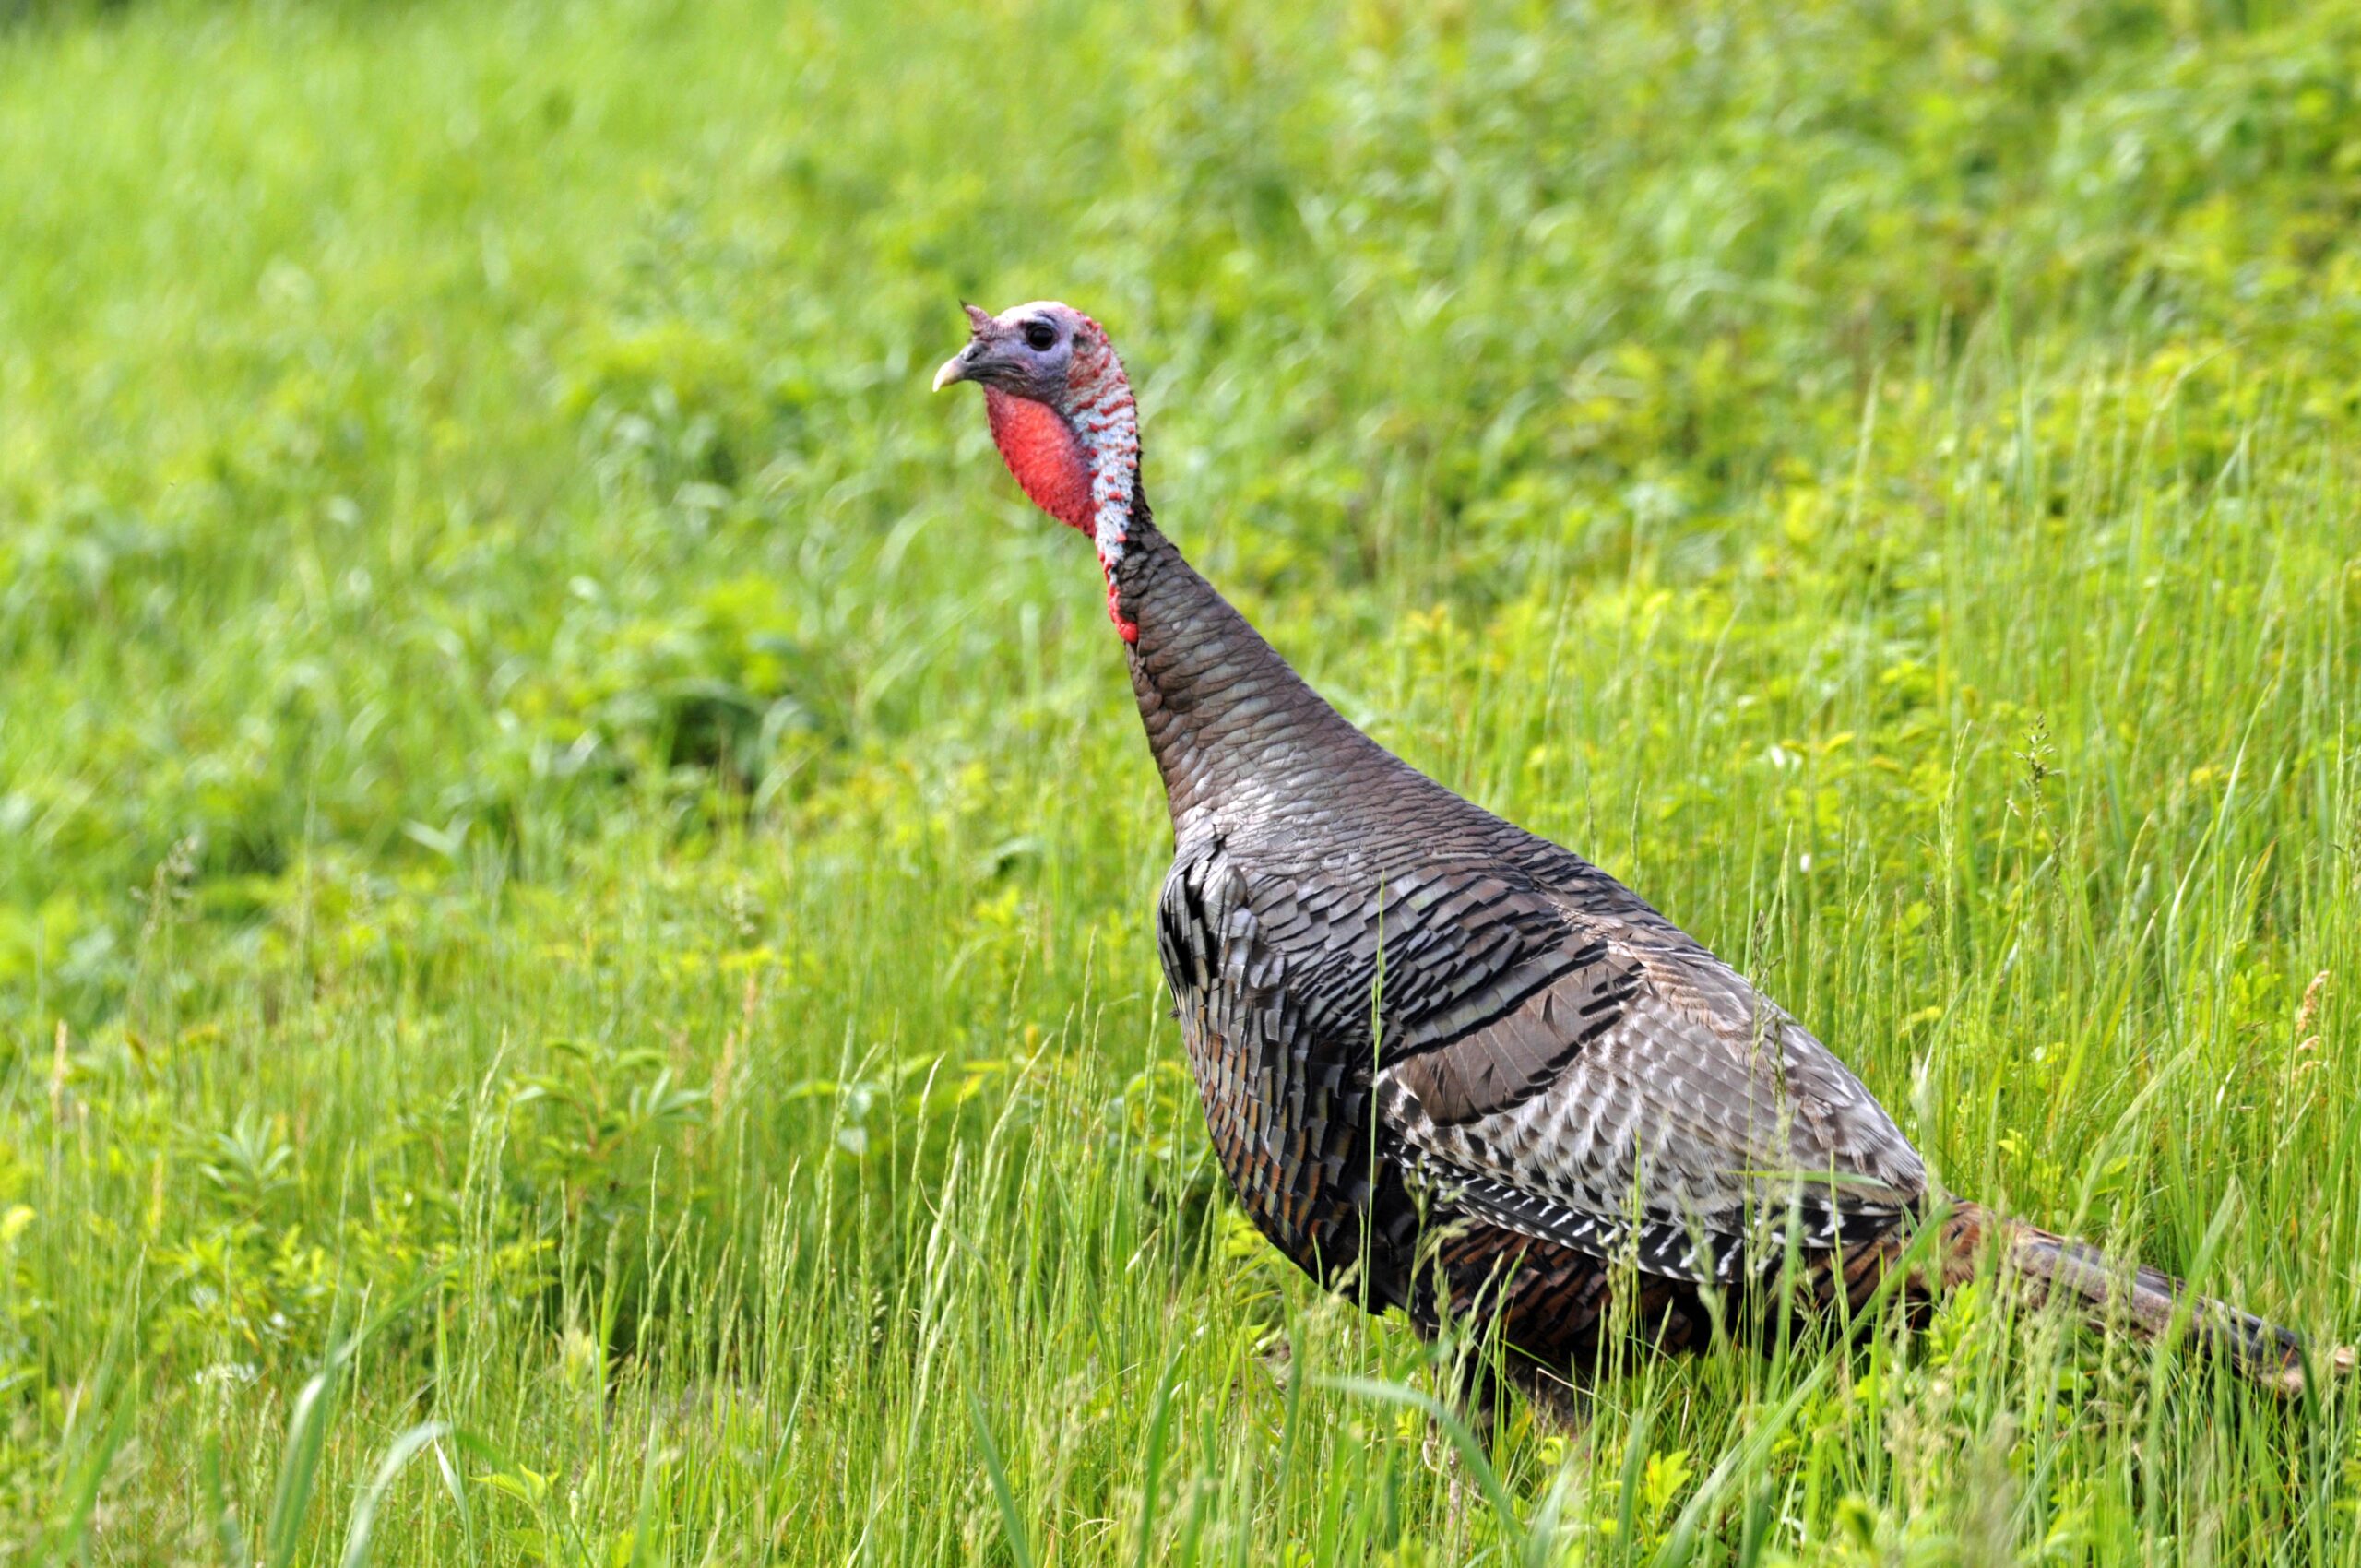 Populations of wild Eastern turkeys have continued to decline in the southeastern United States